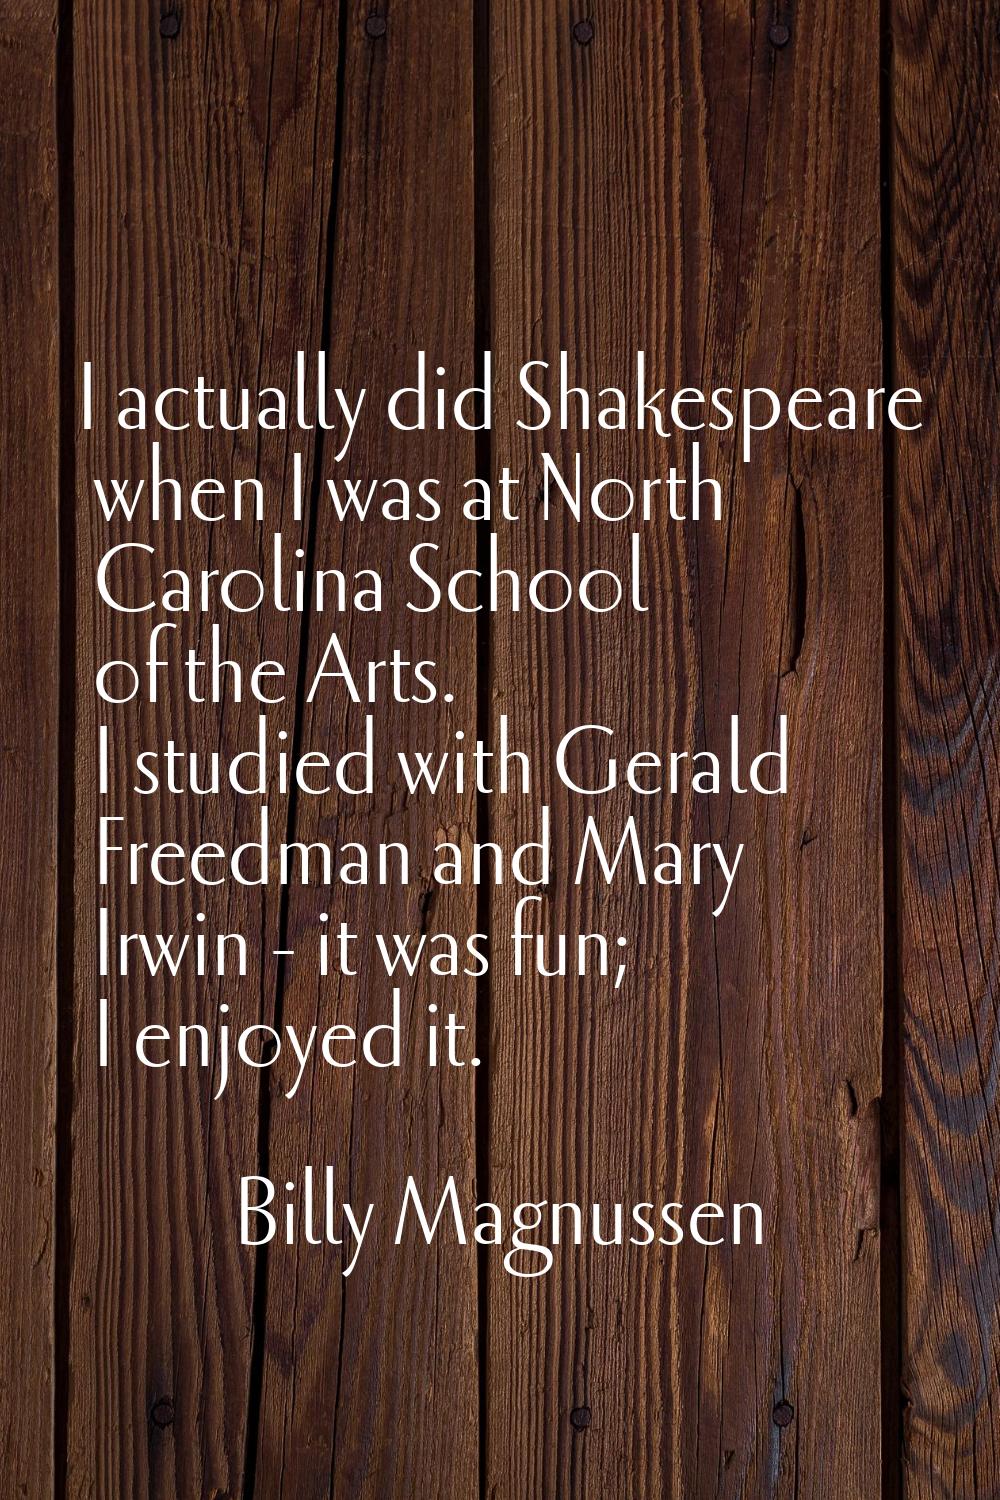 I actually did Shakespeare when I was at North Carolina School of the Arts. I studied with Gerald F